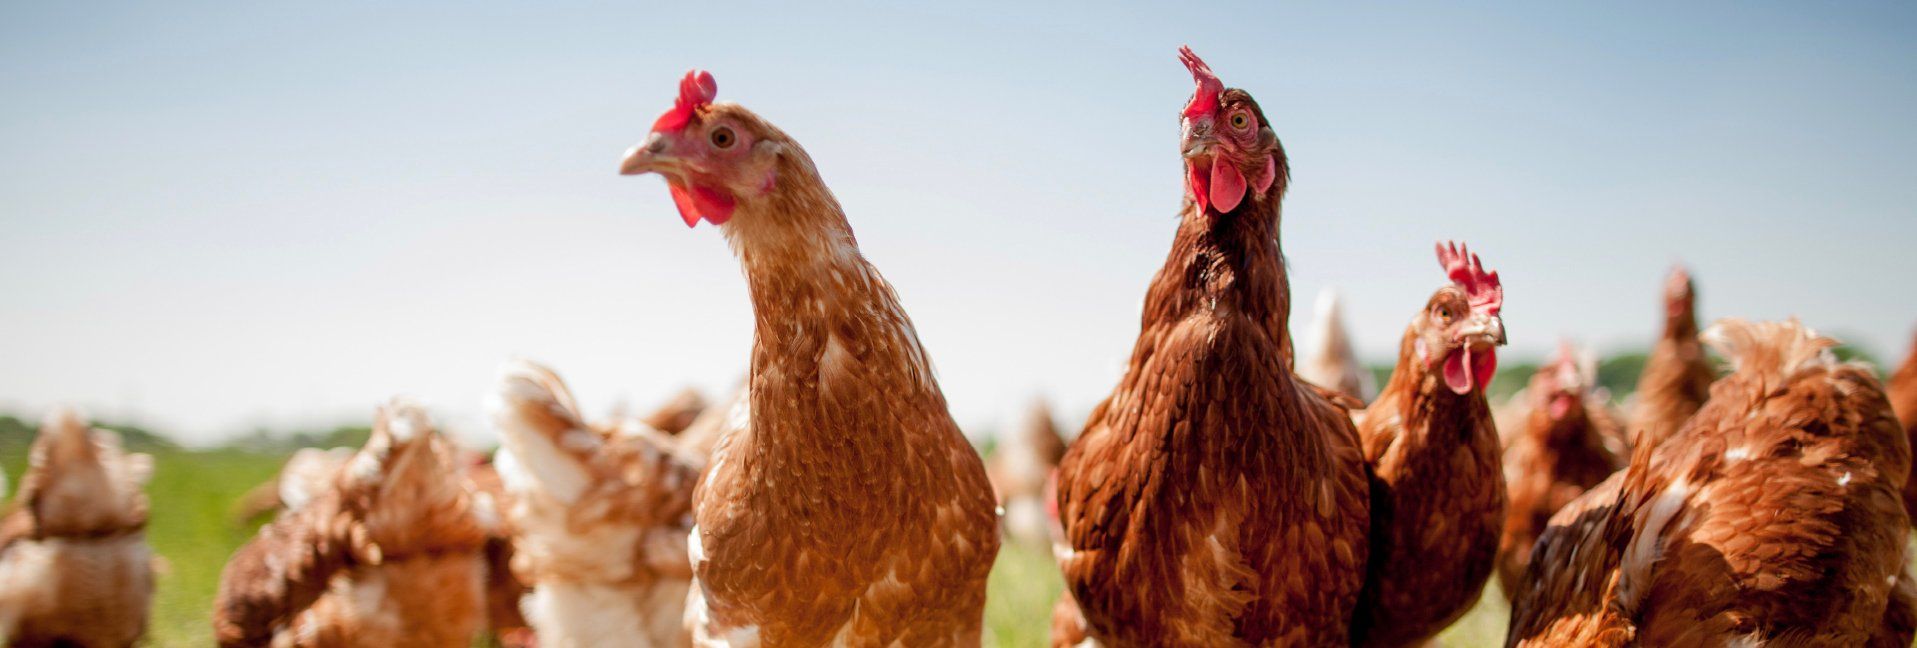 What’s the value of Chickens in reducing food waste?